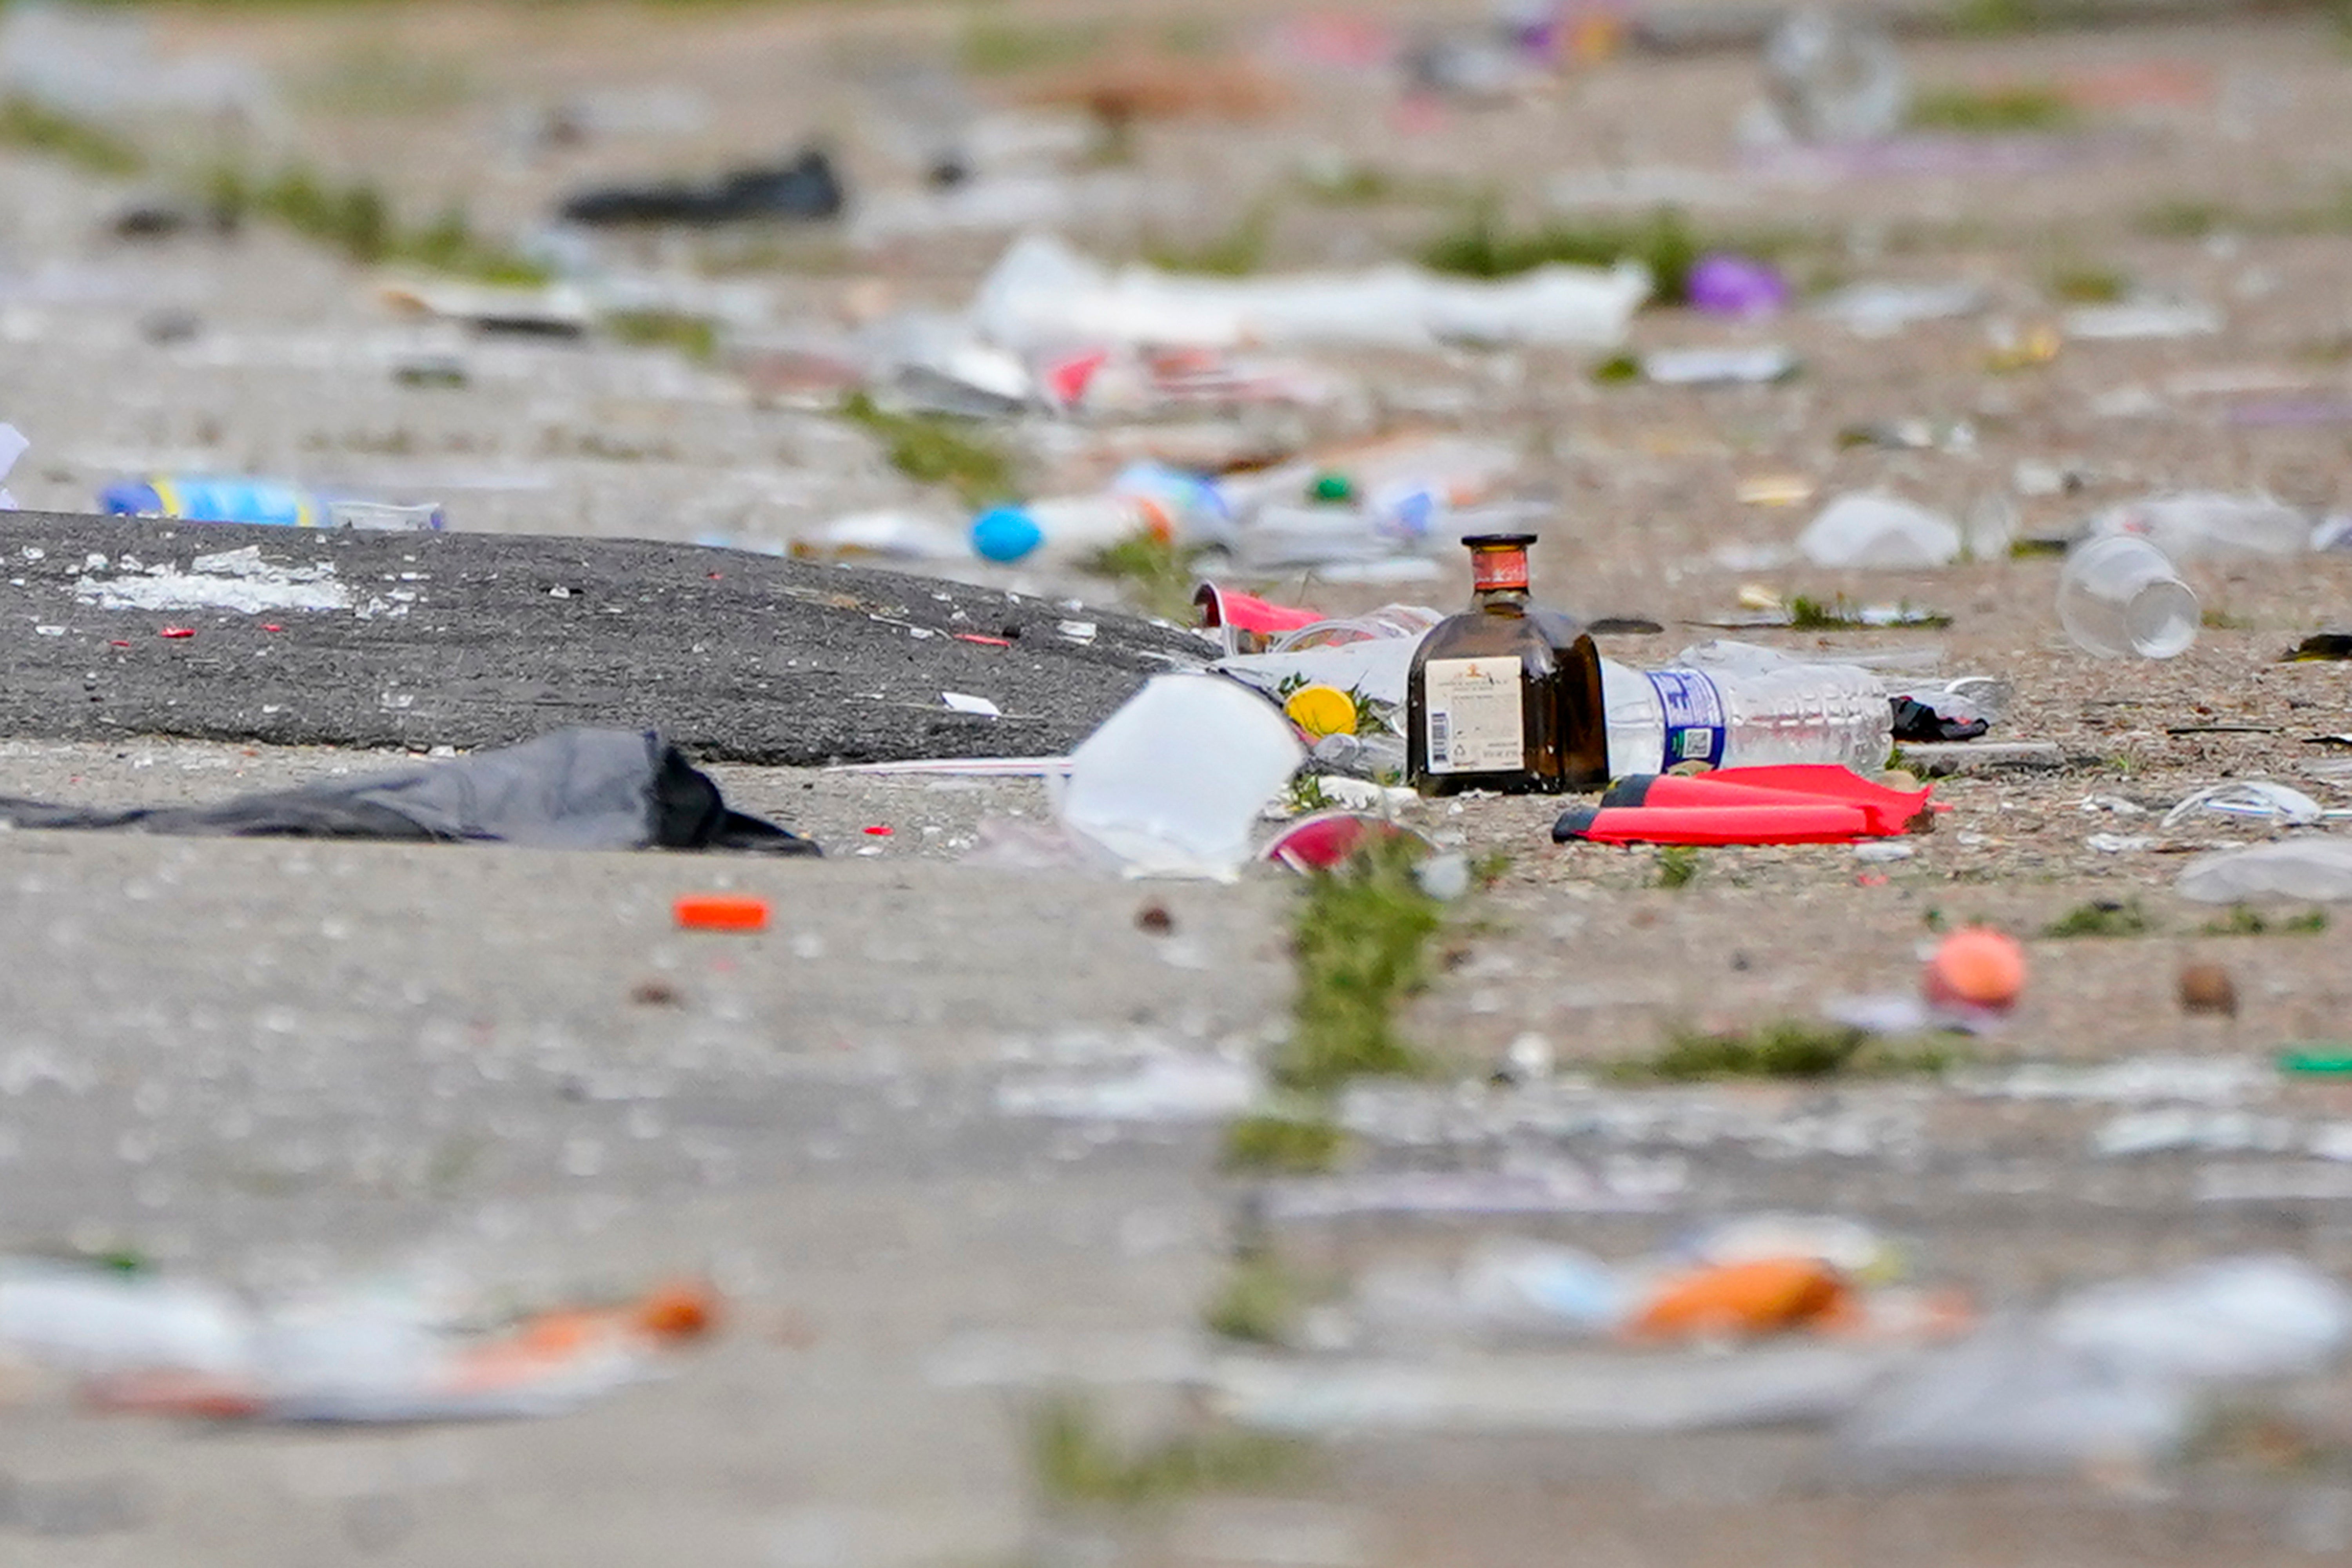 Debris from the aftermath of the mass shooting in Baltimore